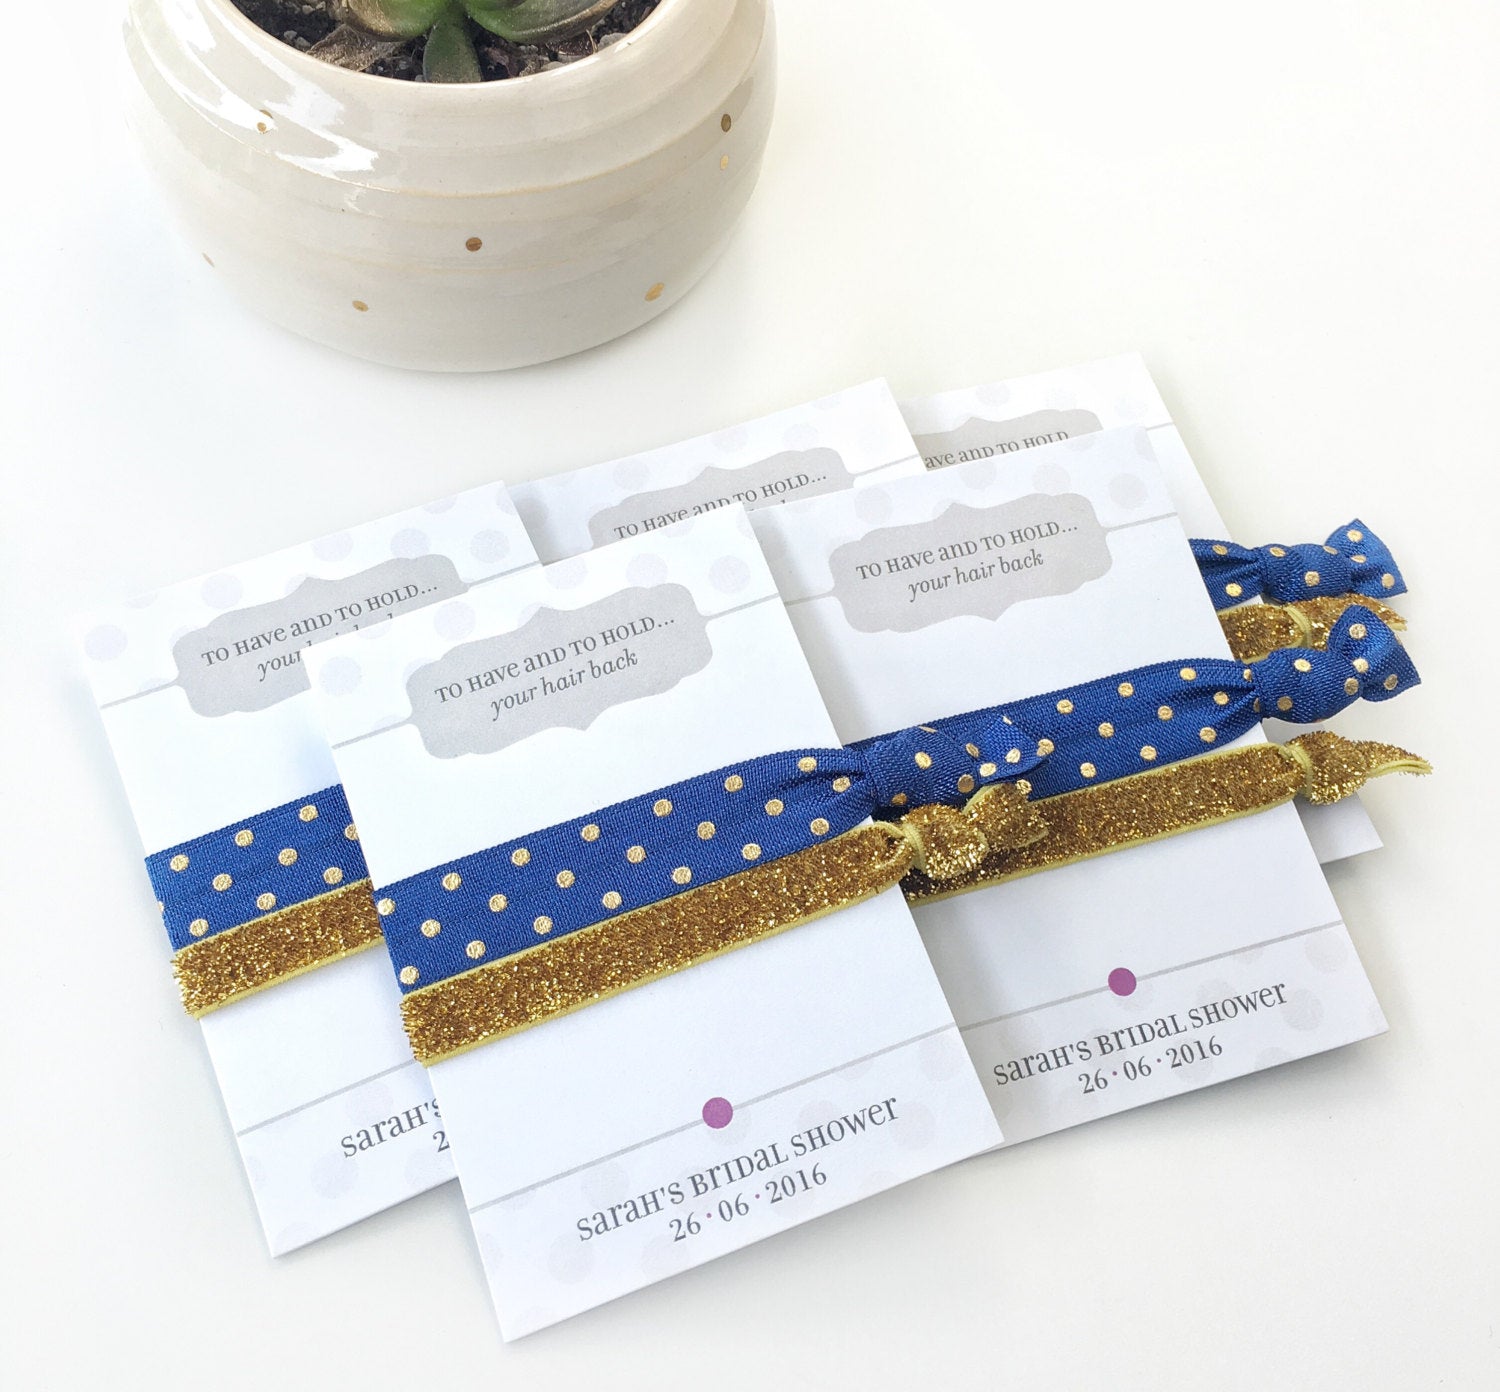 Navy and Gold Bridal Shower Favors for Guests, Gold Bridal Shower Decorations, Bachelorette Hair Ties, Bridal Shower Thank You Gifts - @PlumPolkaDot 